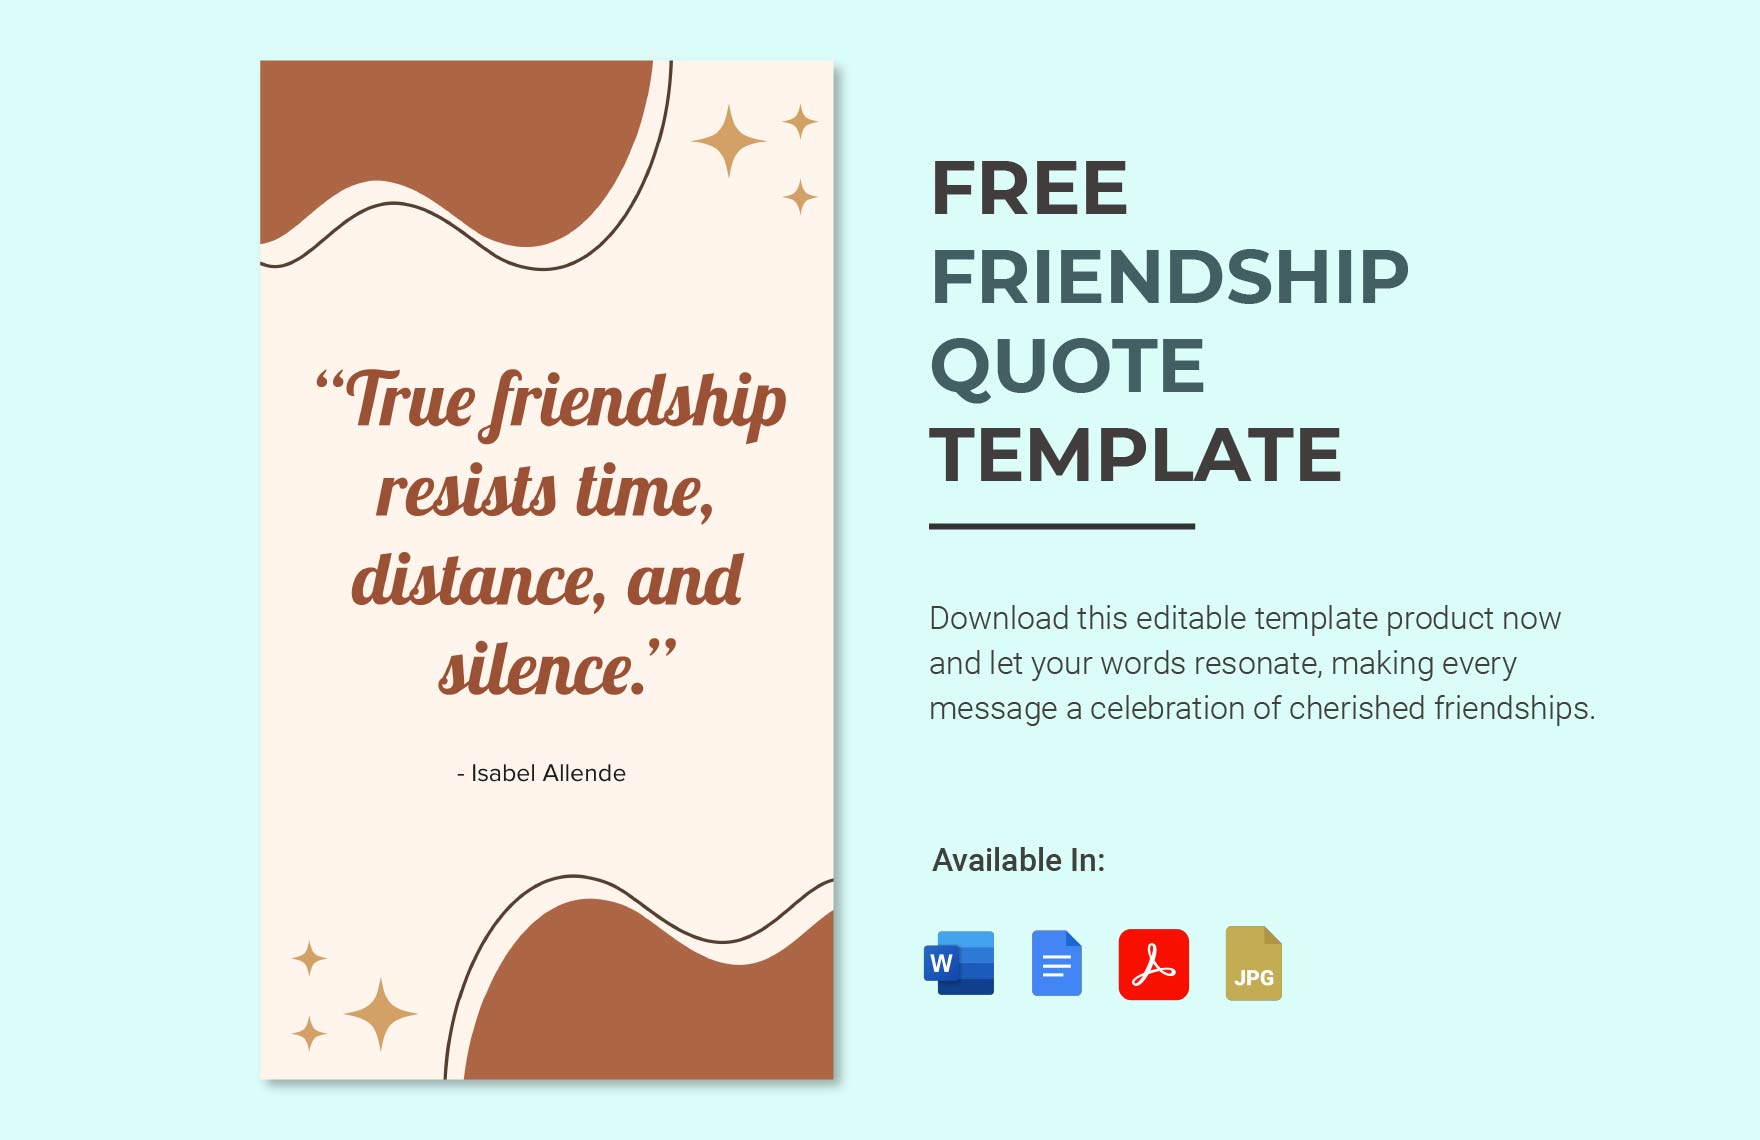 Free Friendship Quote Template in Word, Google Docs, PDF, JPEG